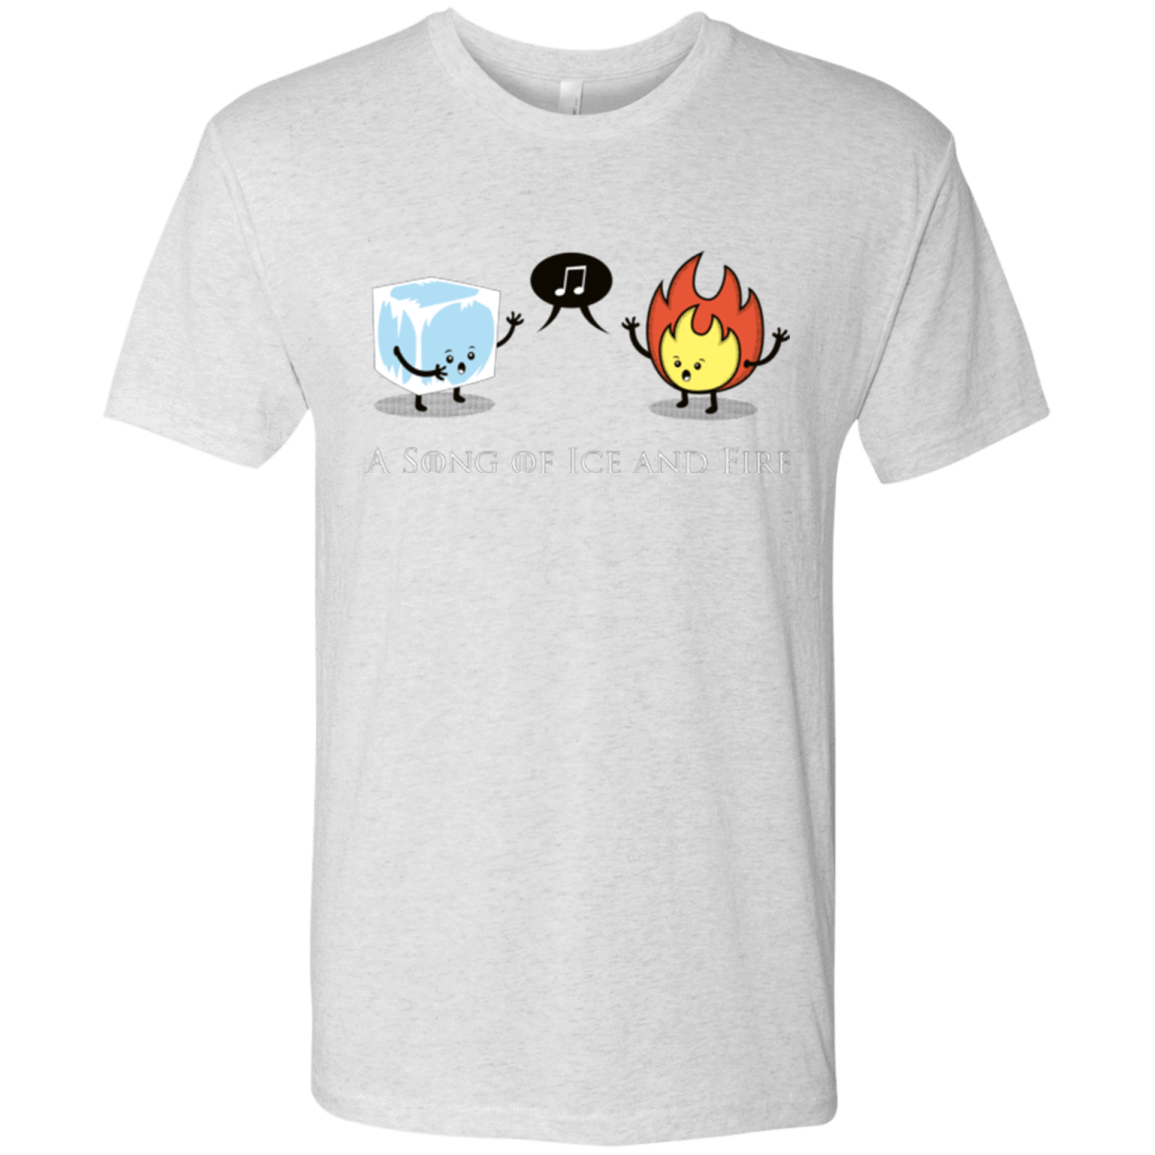 T-Shirts Heather White / Small A Song of Ice and Fire Men's Triblend T-Shirt